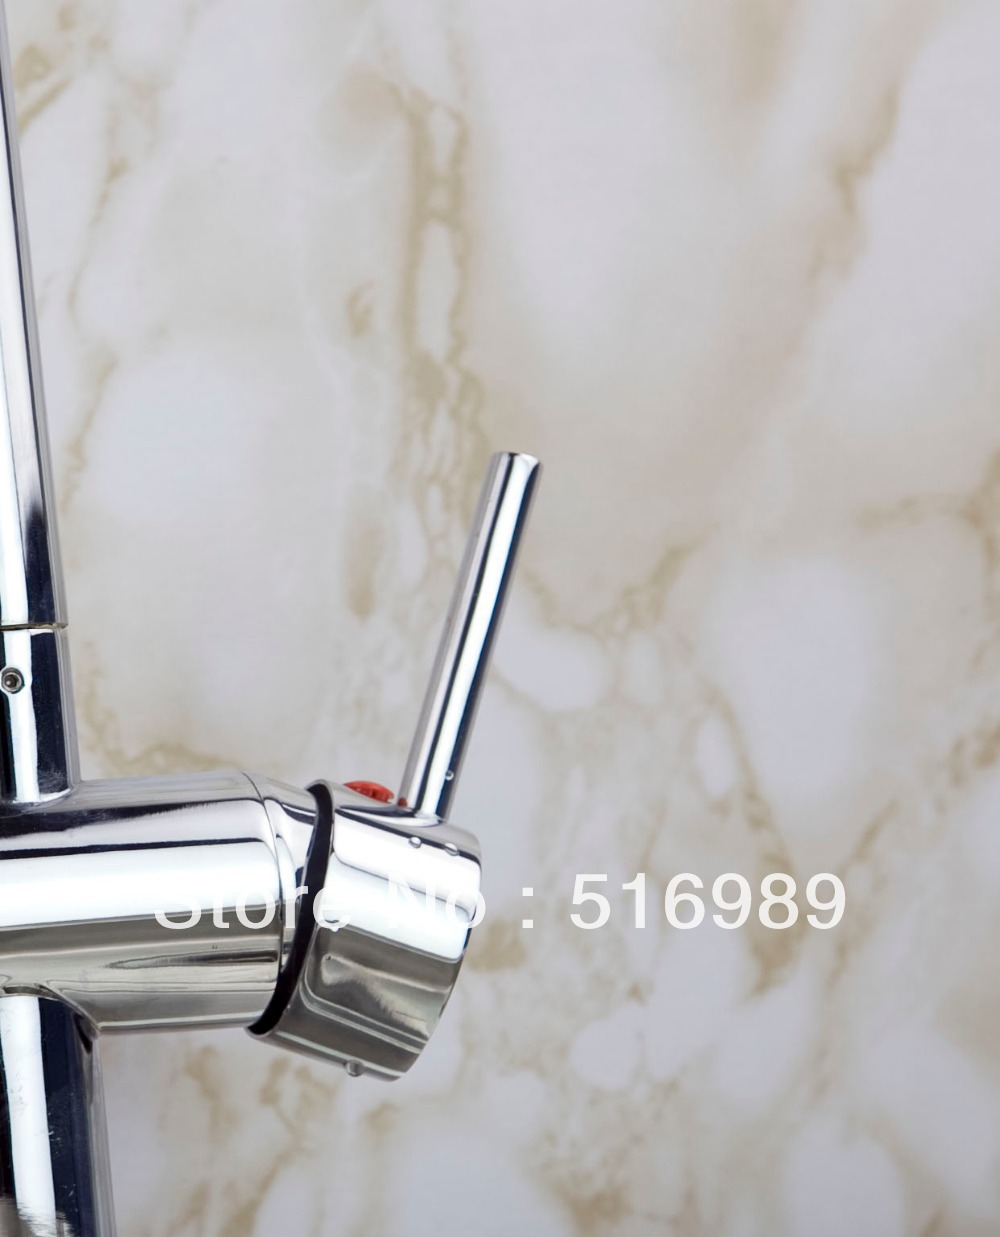 modern chrome kitchen mixer valve water taps pull out design sink faucet leon61